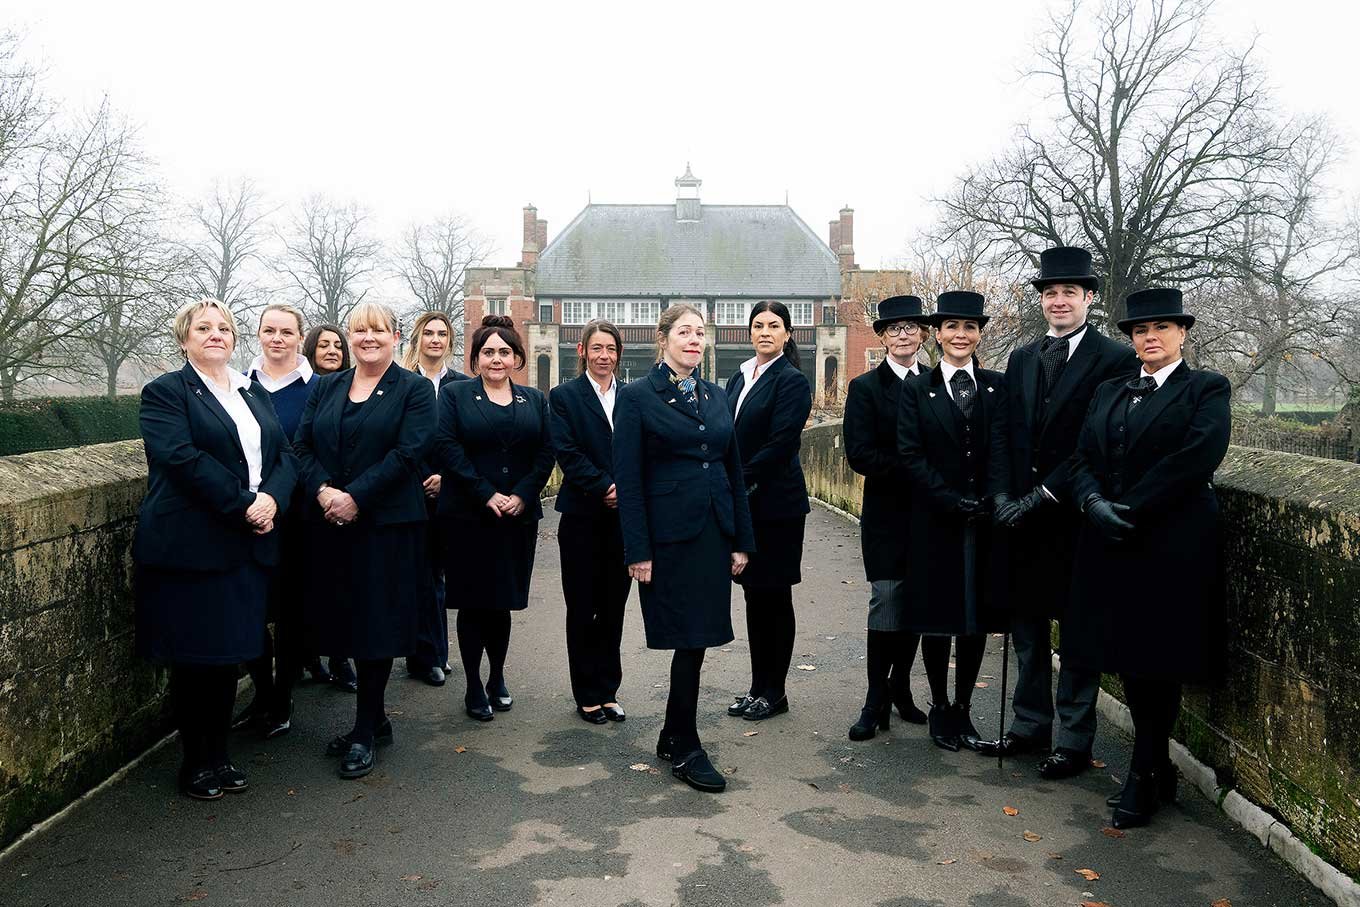 A team of funeral directors and arrangers from Ginns & Gutteridge stand together on a bridge